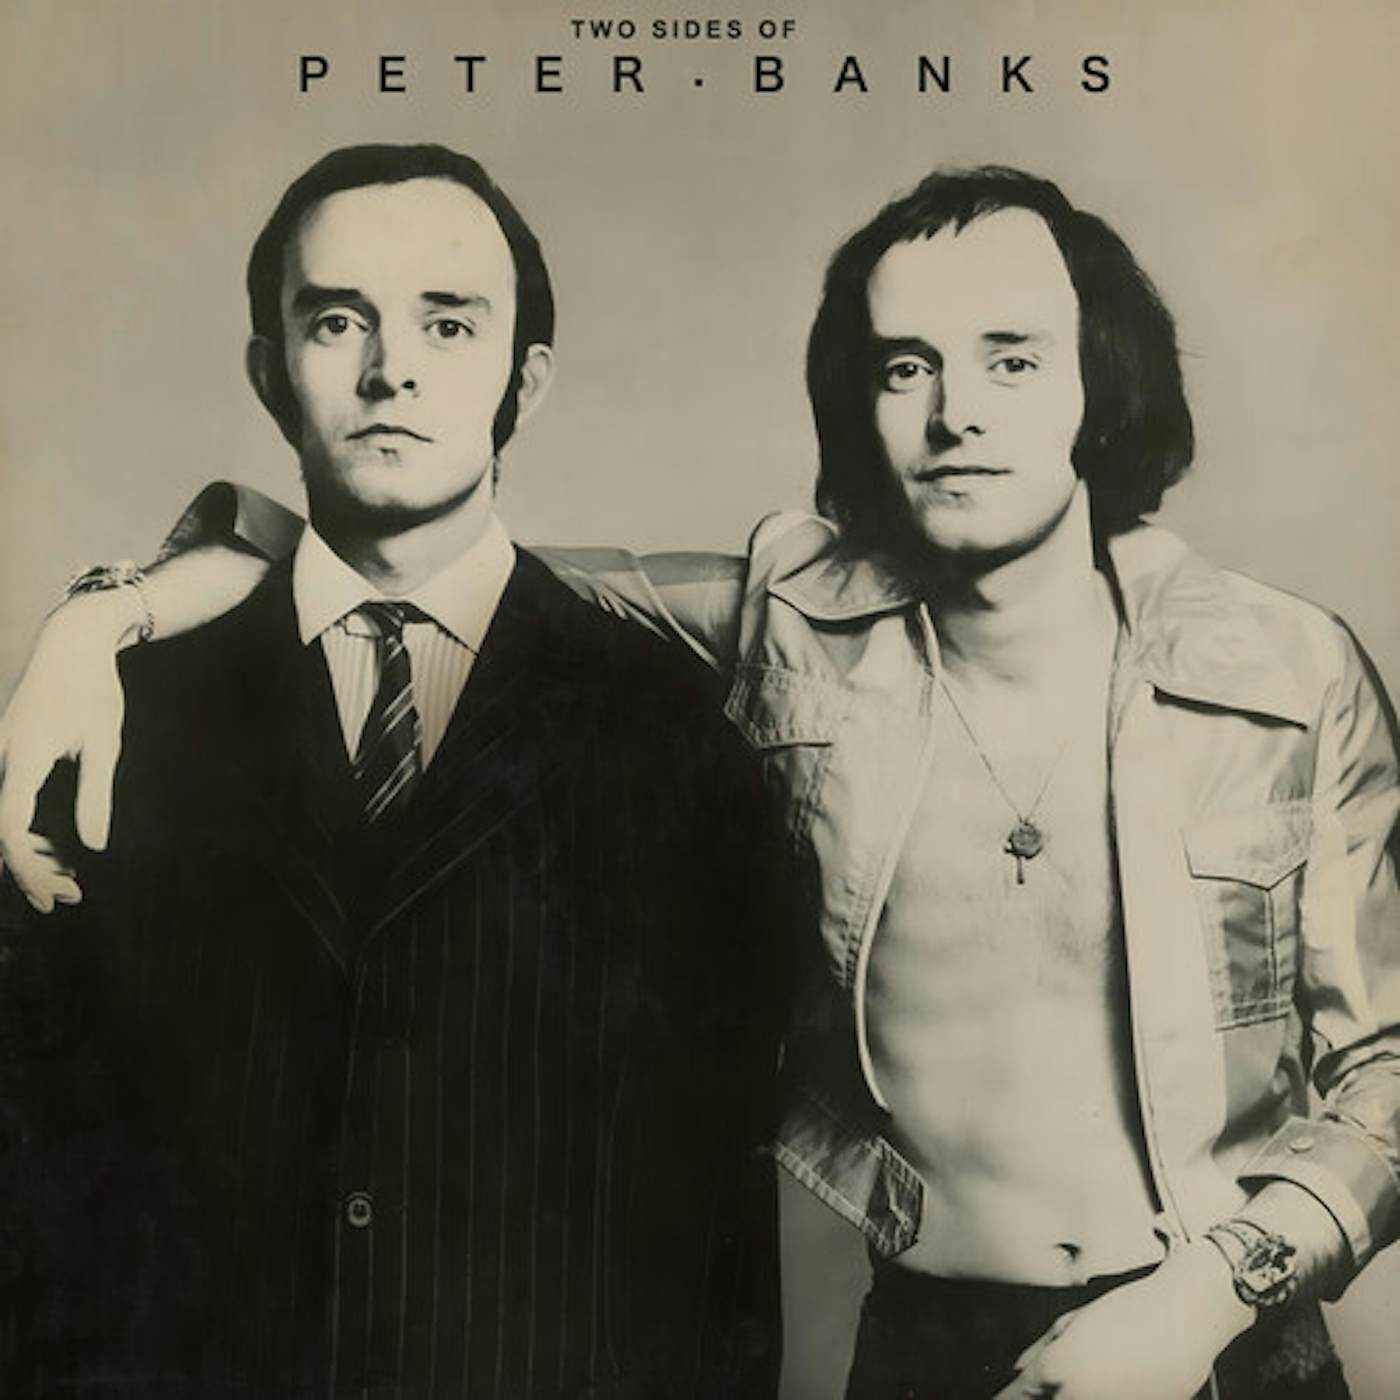 Peter Banks TWO SIDES OF - RED MARBLE Vinyl Record